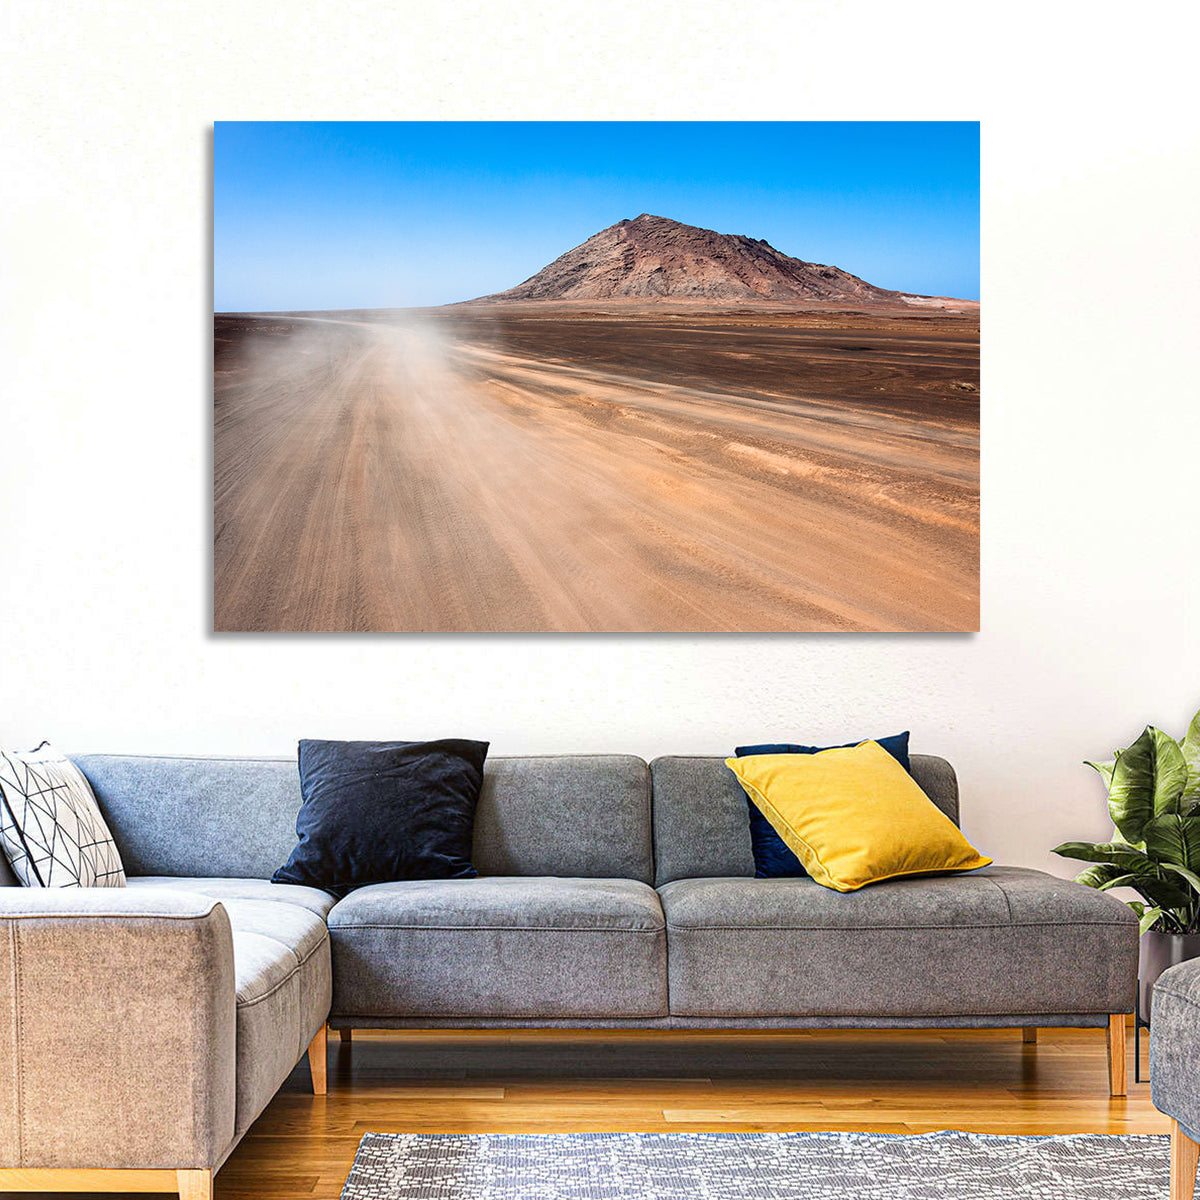 Cabo Verde Crater Wall Art